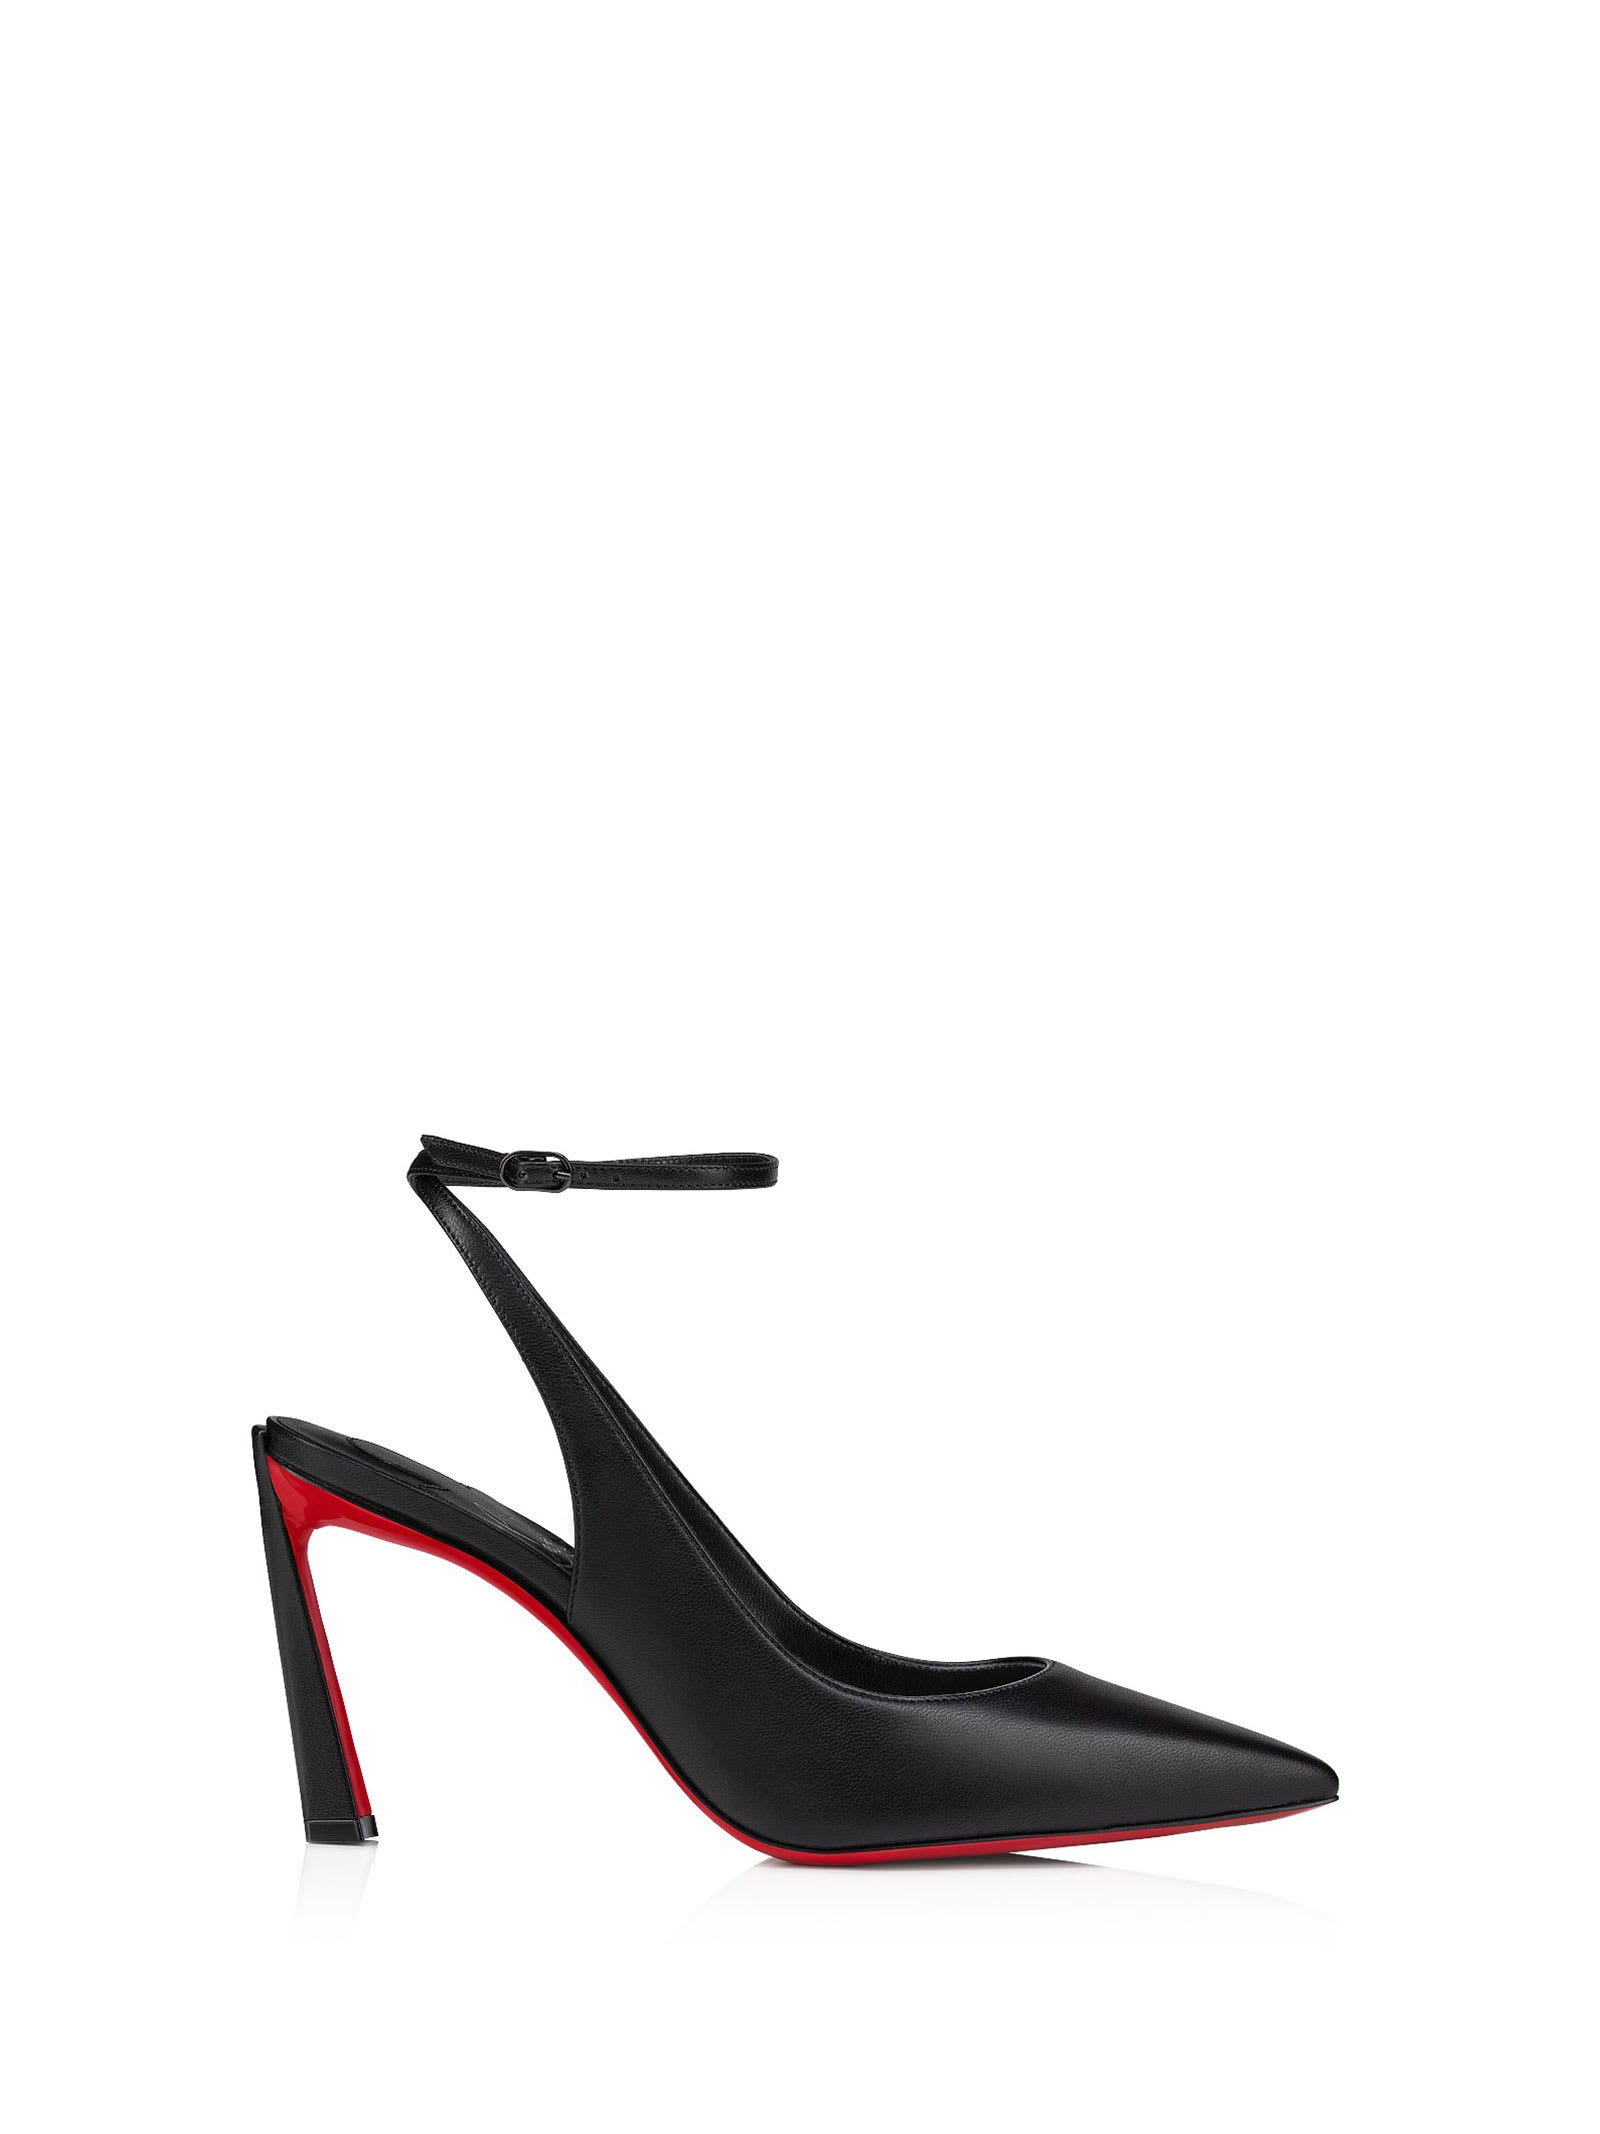 Shop Christian Louboutin Condora Strappy Pumps In Nappa Leather In Black